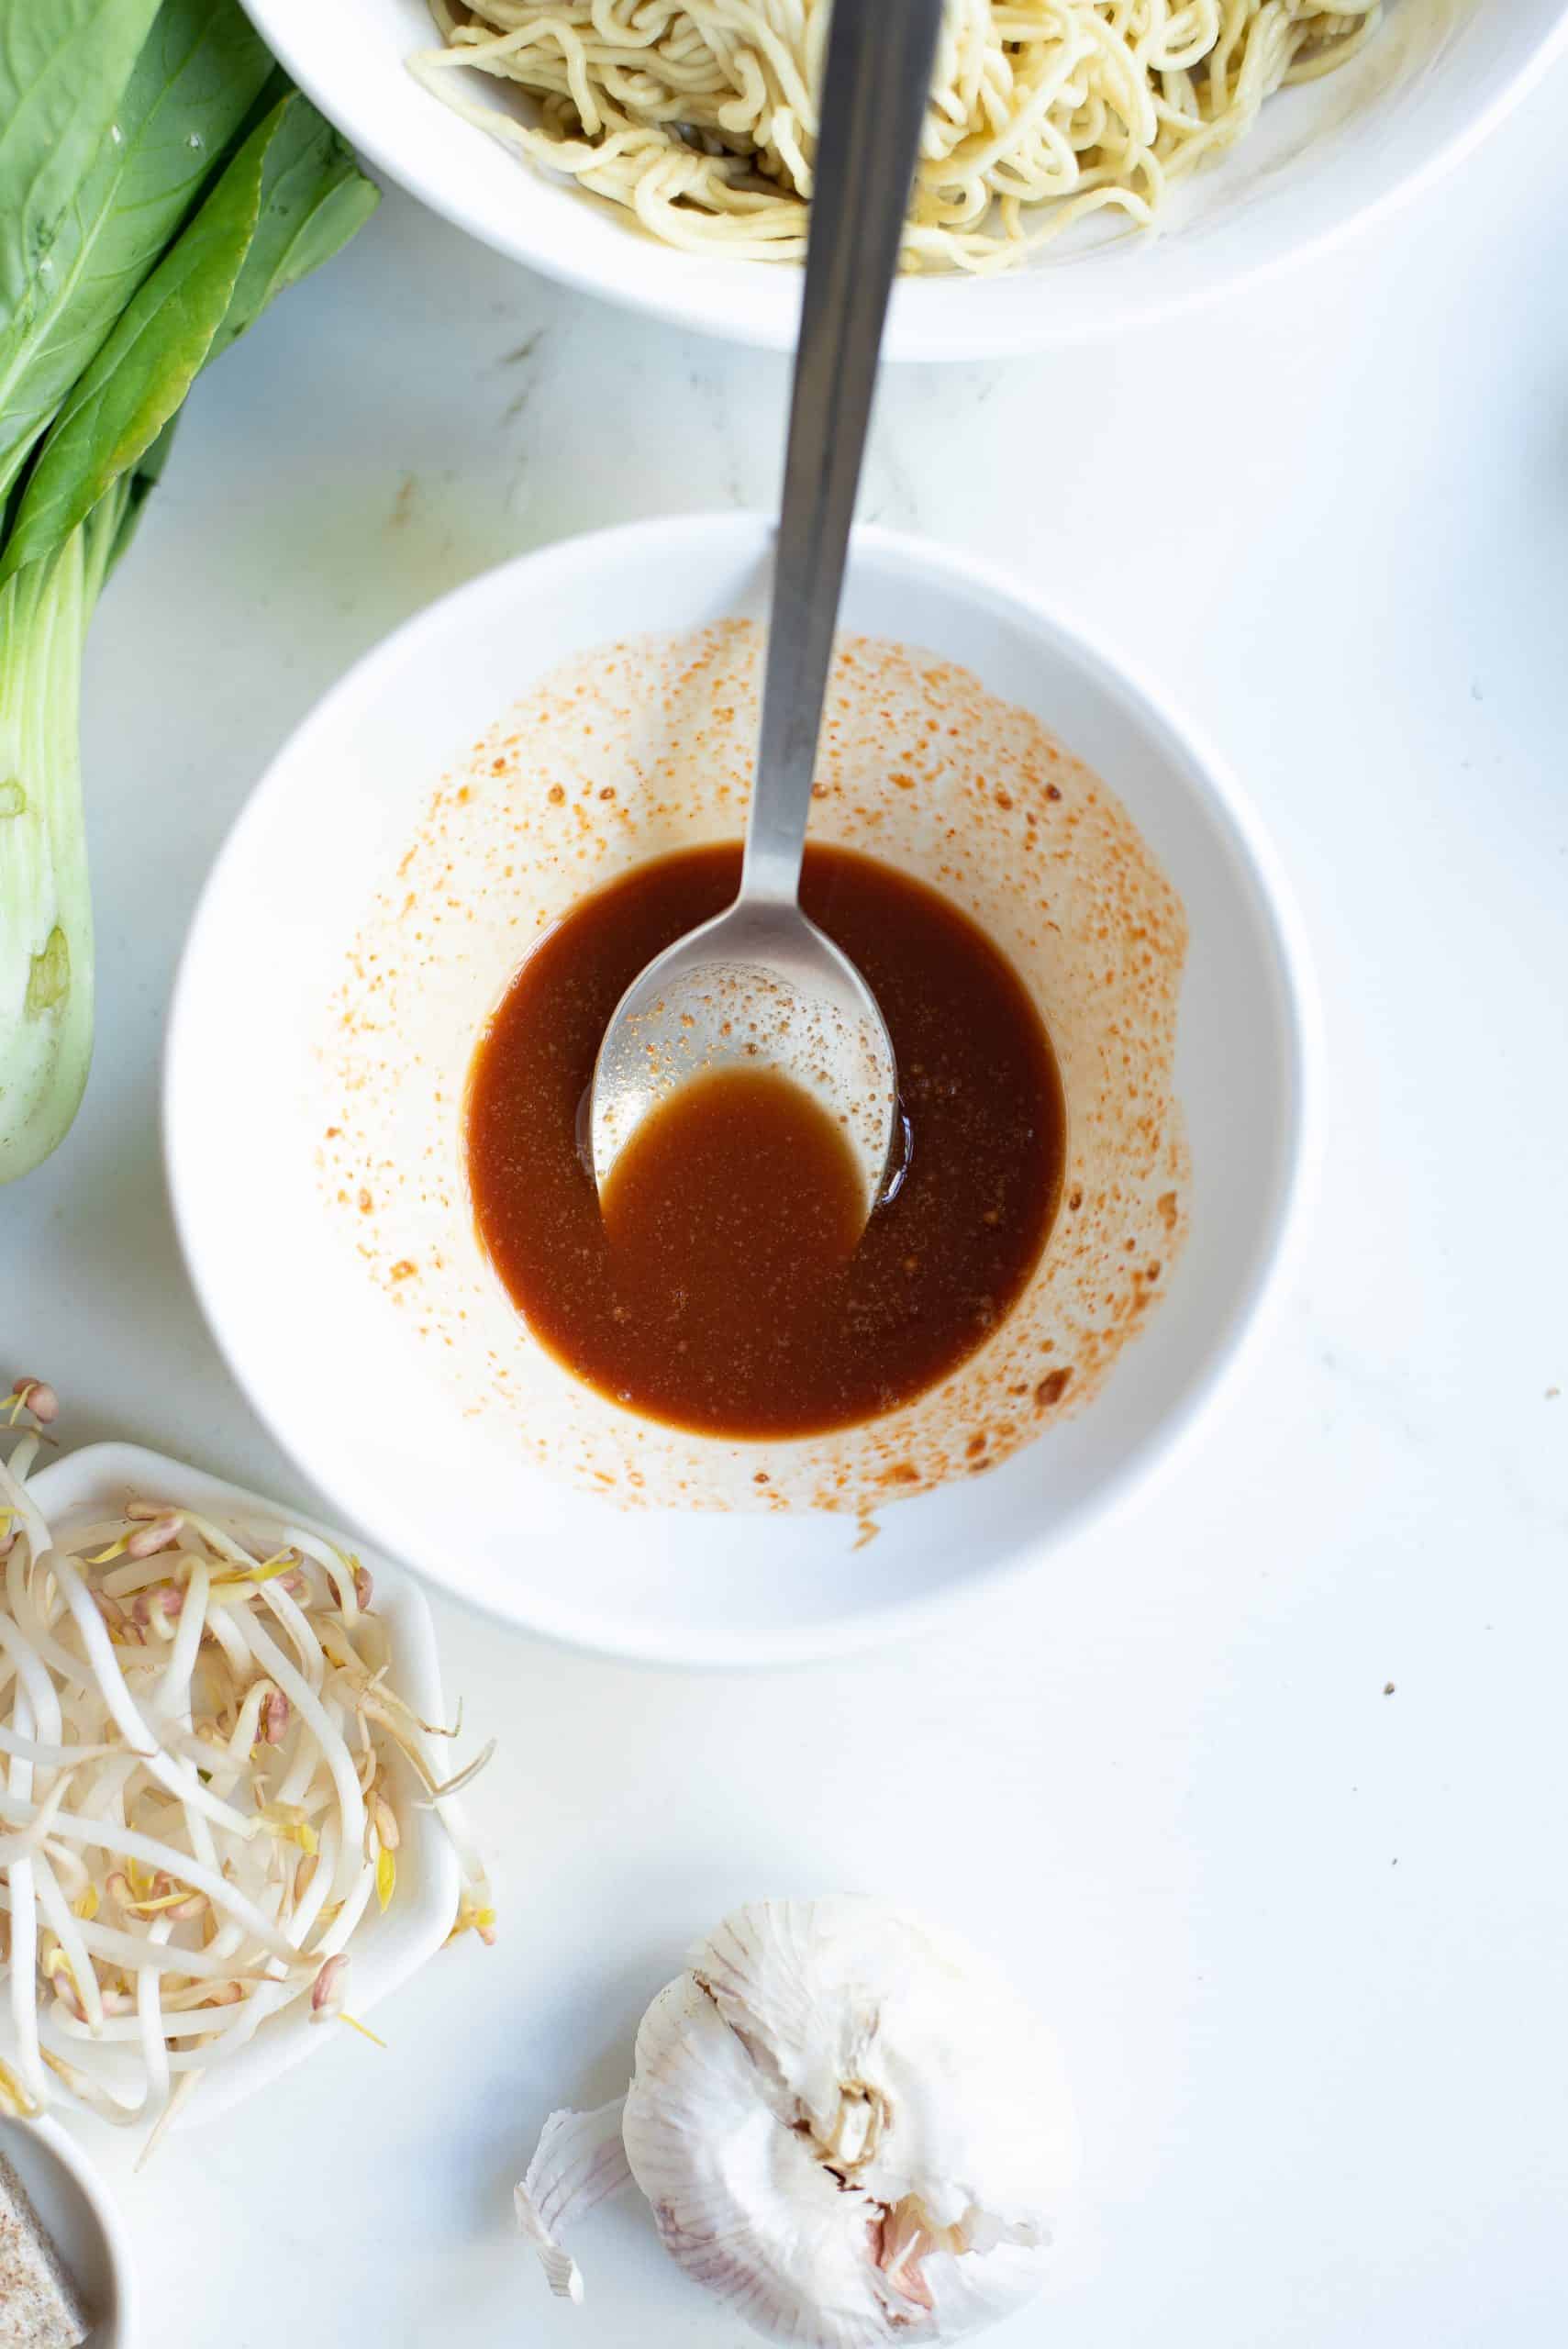 Top view photo of ginger powder, garlic powder, soy sauce, and sriracha mixed together in a white bowl. The bowl is surrounded by garlic, bean sprouts, boy choy, and noodles in a decorative manner.